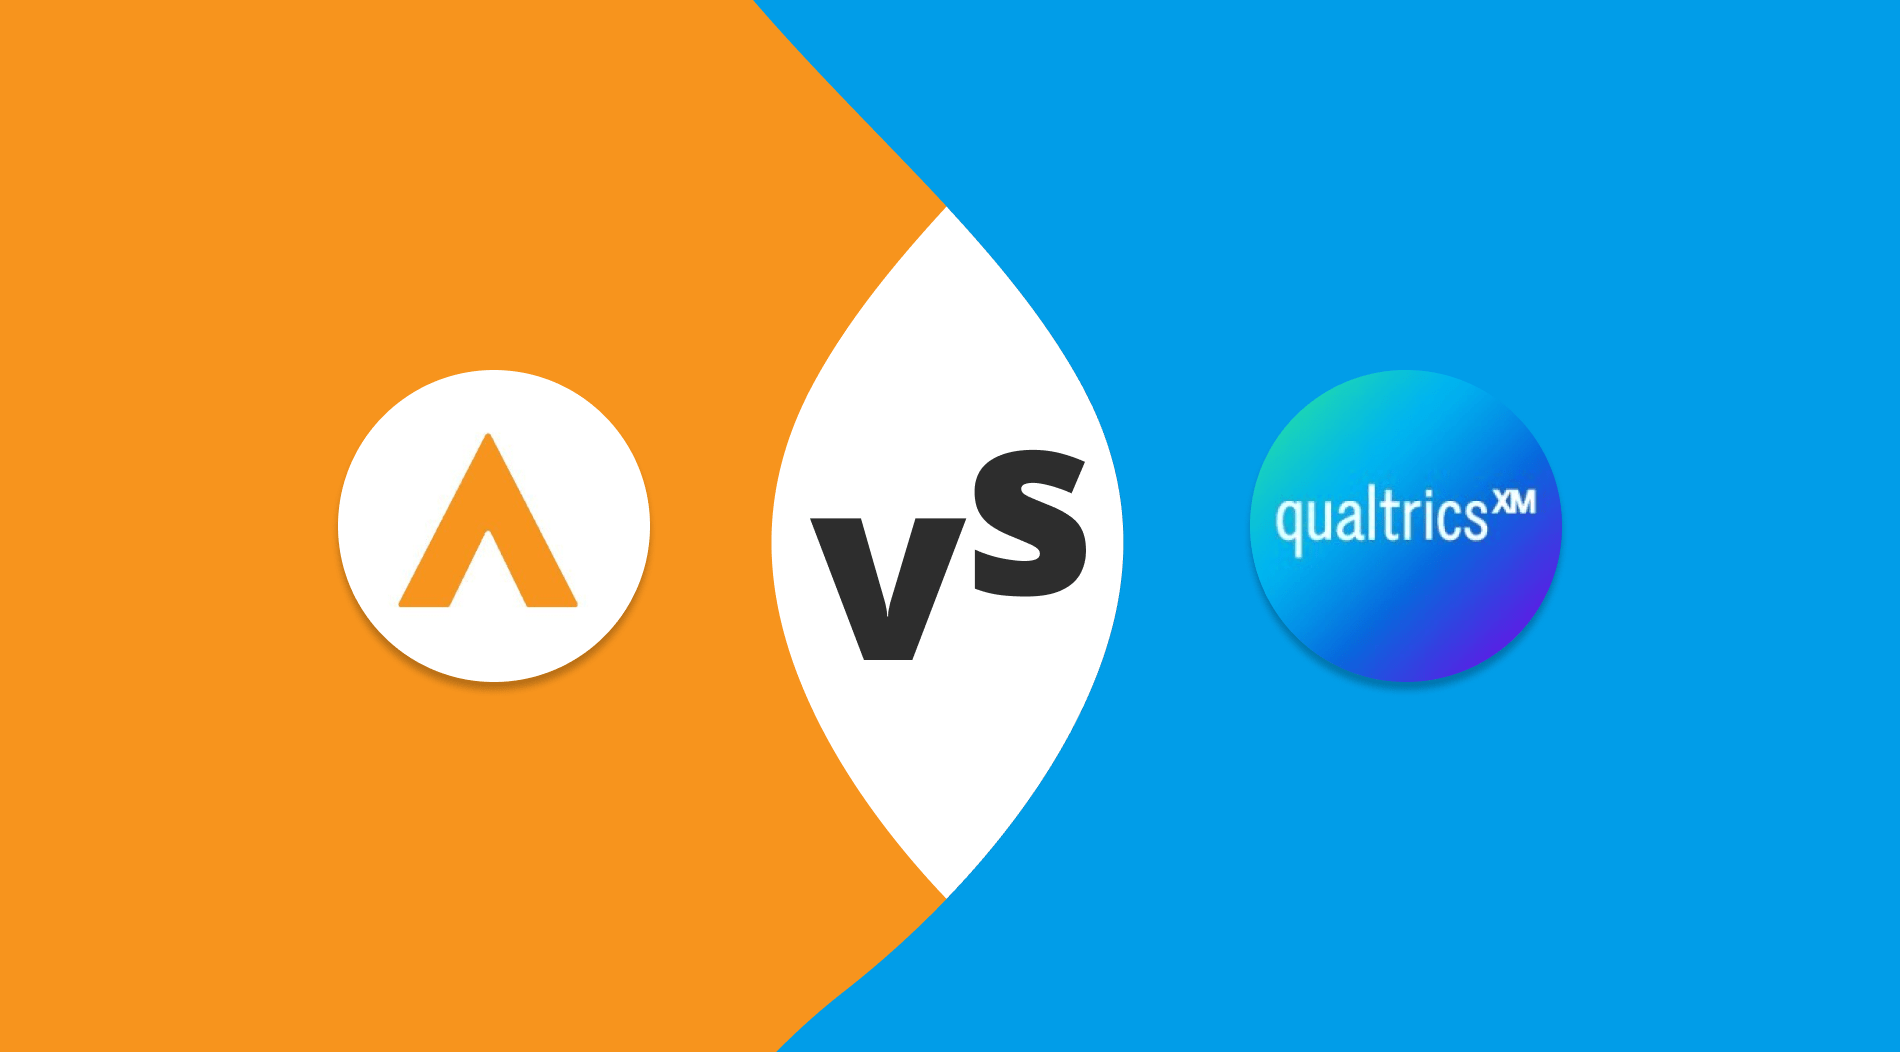 Alchemer vs. Qualtrics: Which one is better?